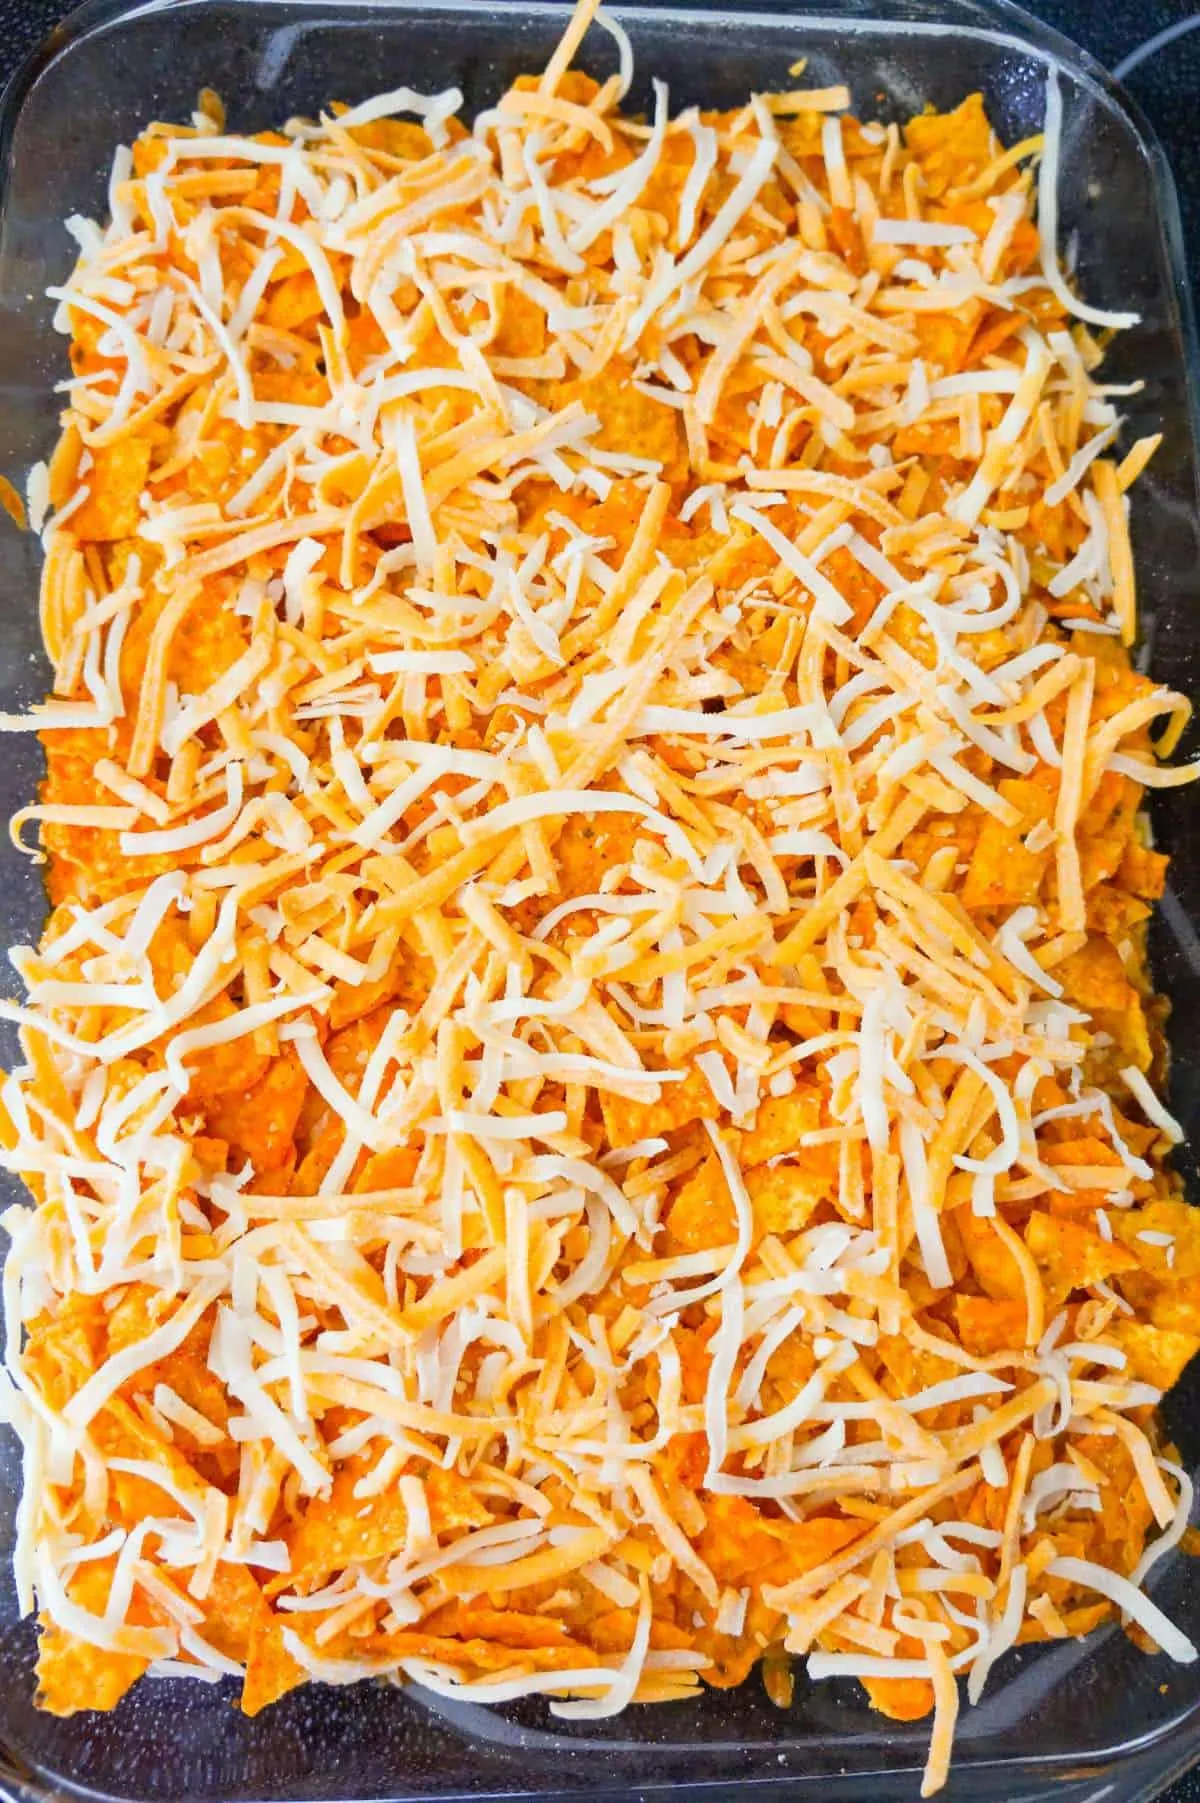 shredded cheese on top of Doritos chili pie